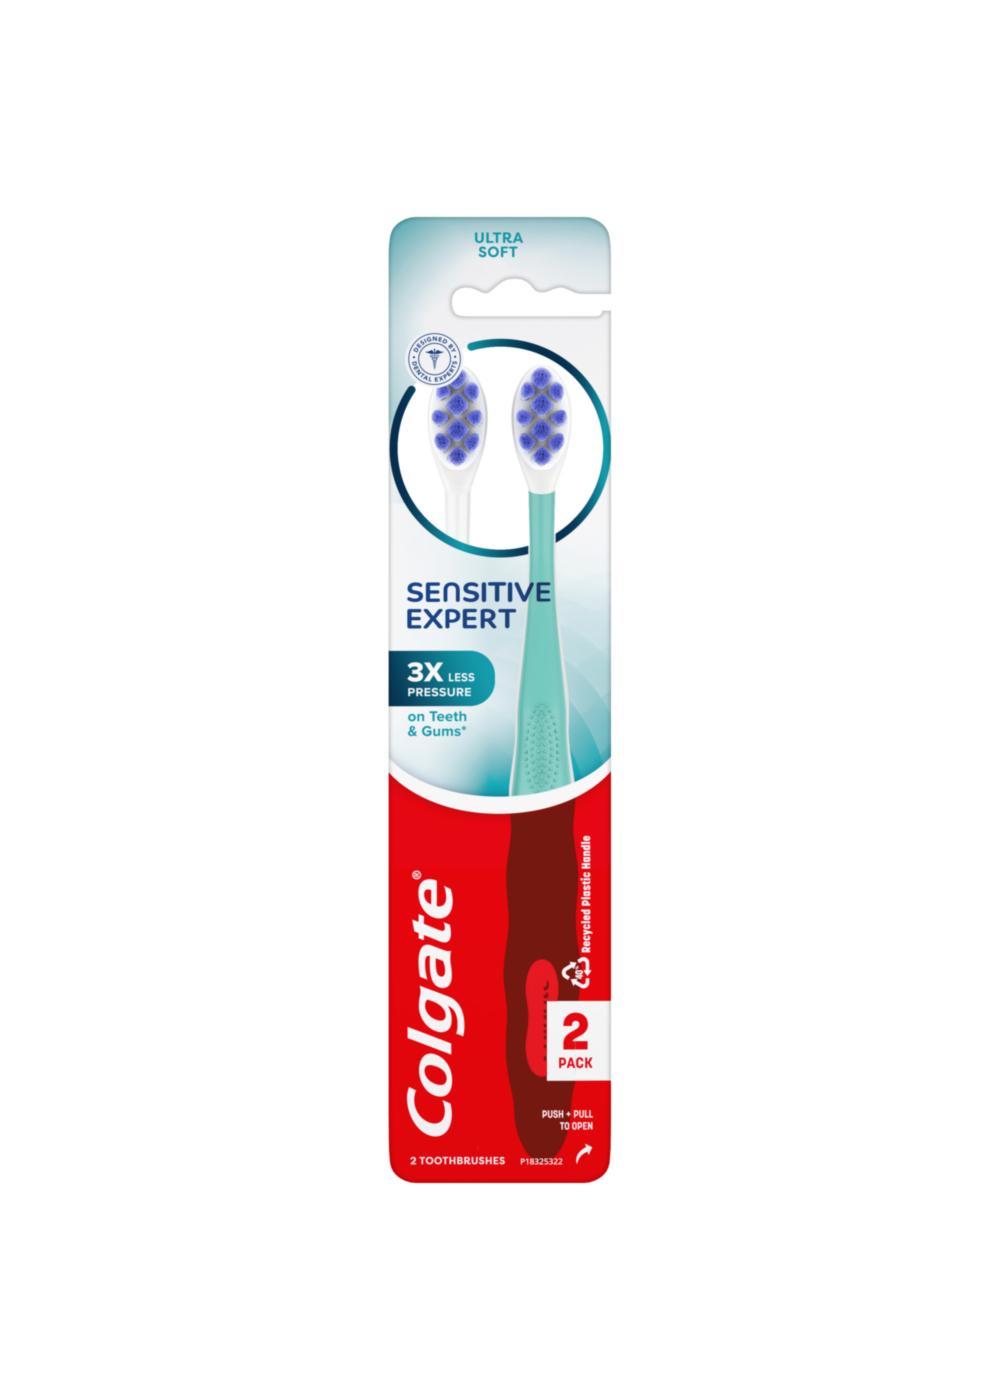 Colgate Sensitive Expert Toothbrushes - Ultra Soft; image 1 of 3